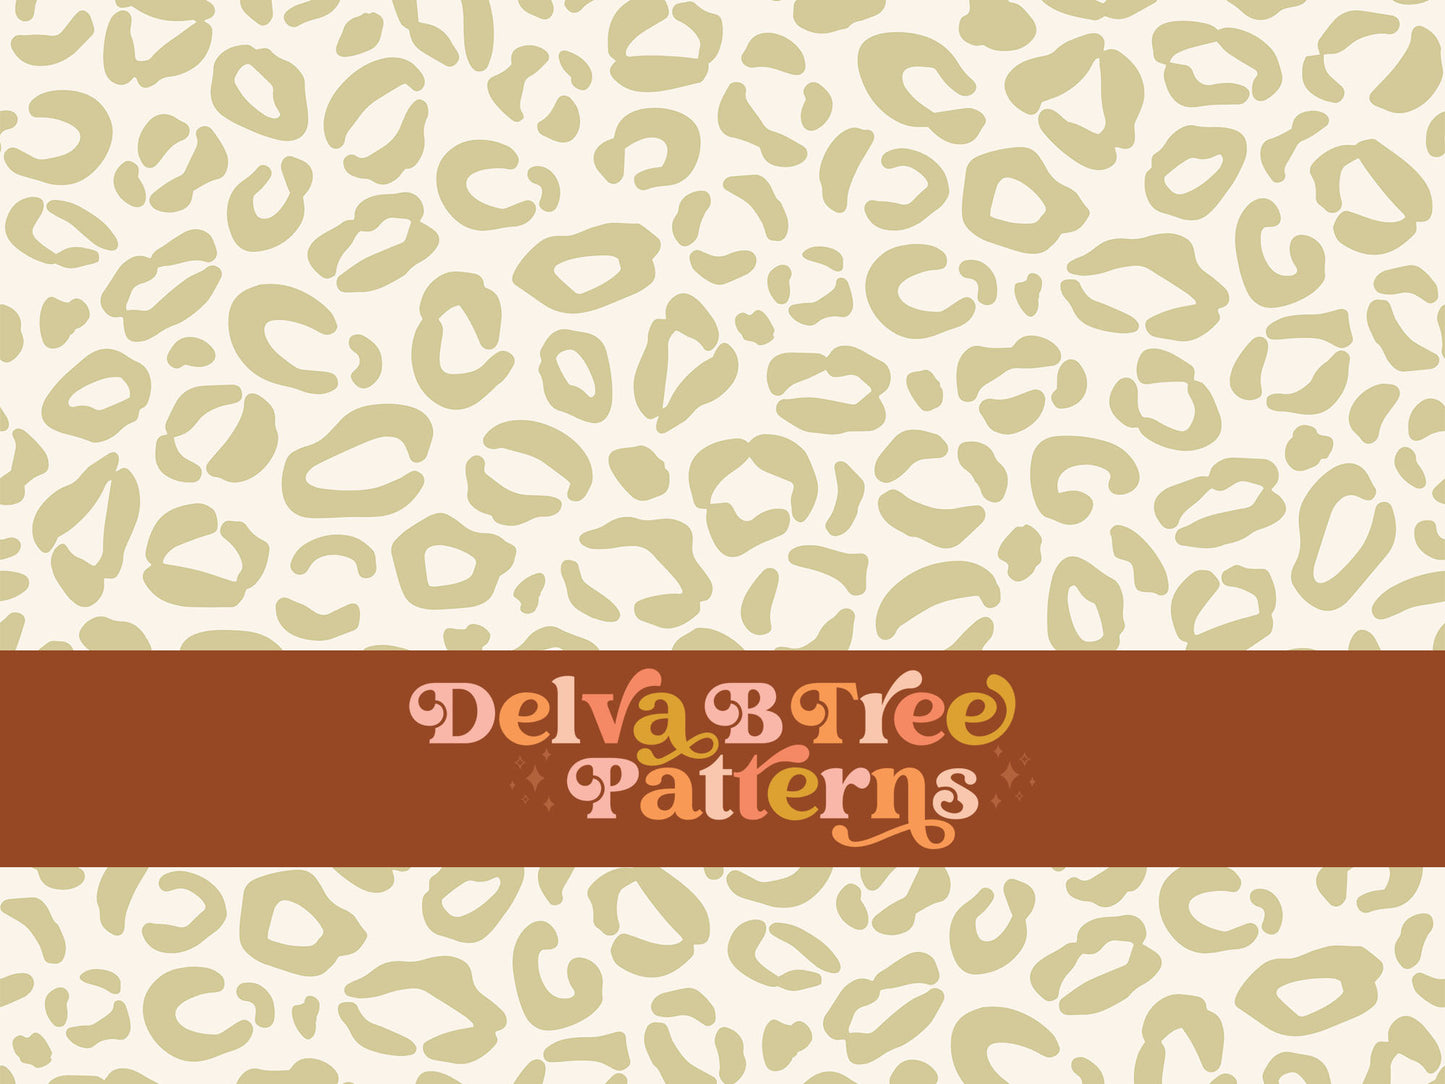 Muted green yellow and cream leopard seamless file for fabric printing. Animal Skin Leopard Print Repeat Pattern for textiles, polymailers, baby boy lovey blankets, nursery crib bedding, kids clothing, girls hair accessories, home decor accents, pet products.